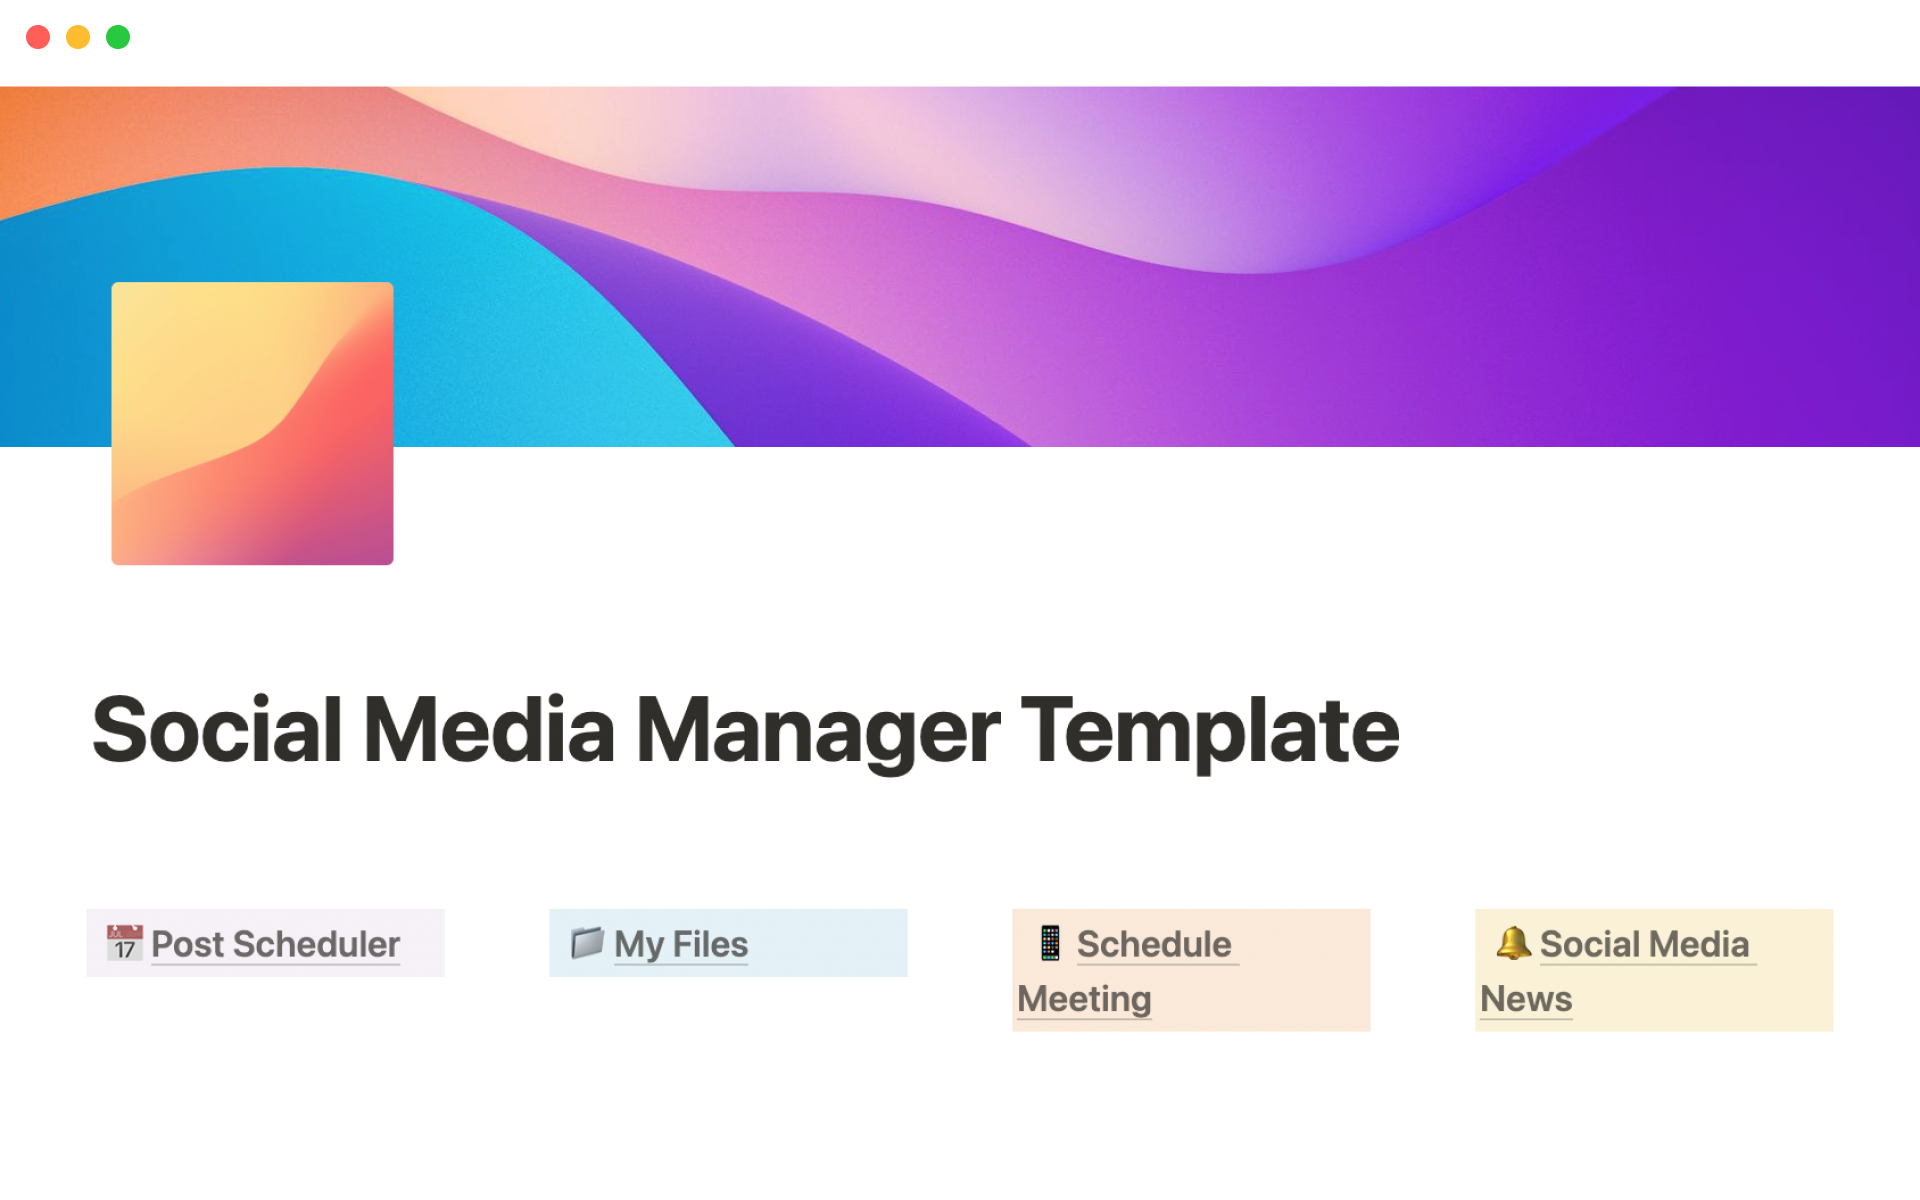 The ultimate dashboard for social media managers that want to optimize their workflow.